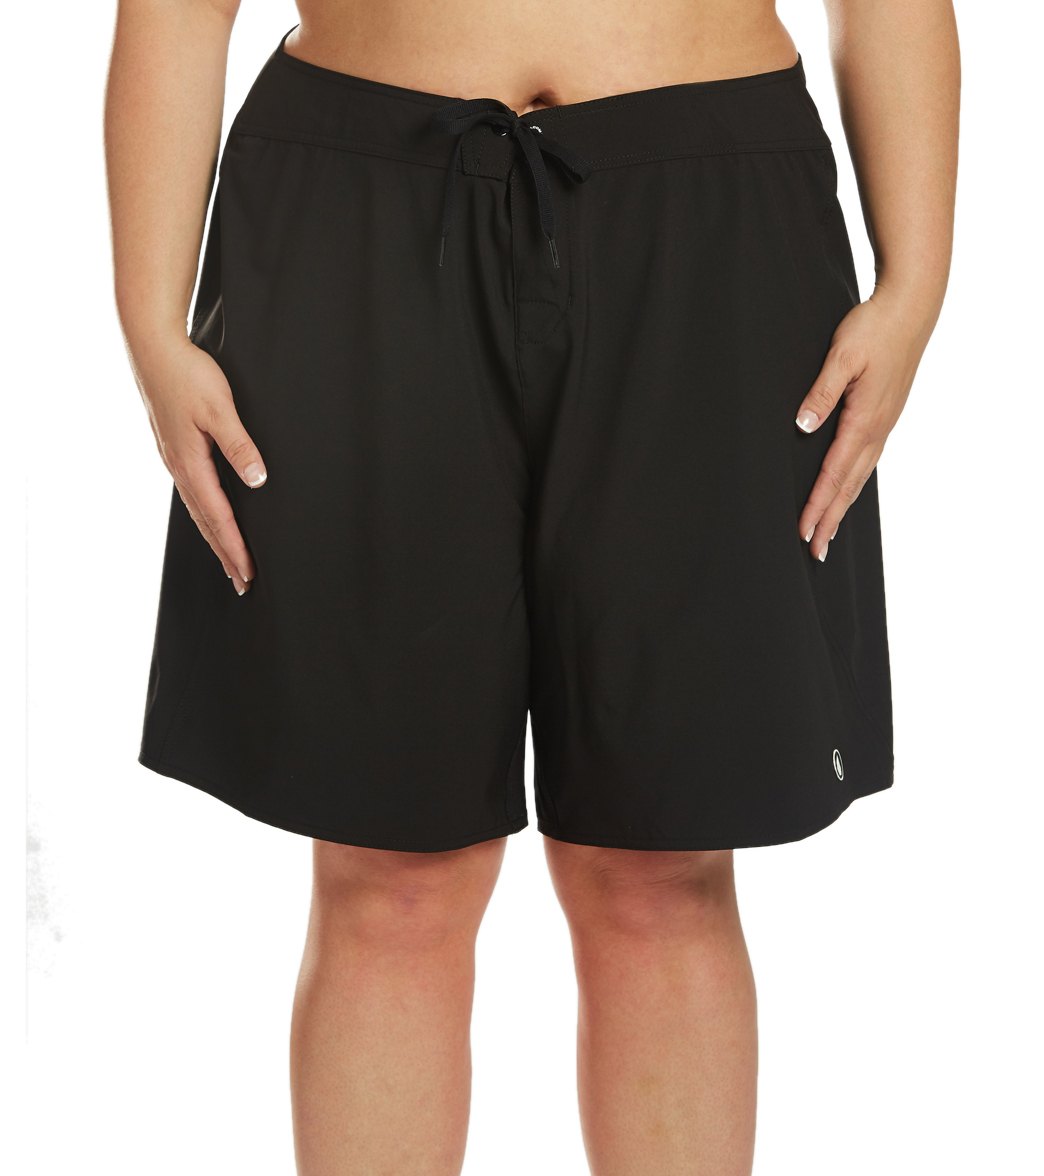 Volcom Plus Size Simply Solid 11 Boardshorts - Black 16W - Swimoutlet.com